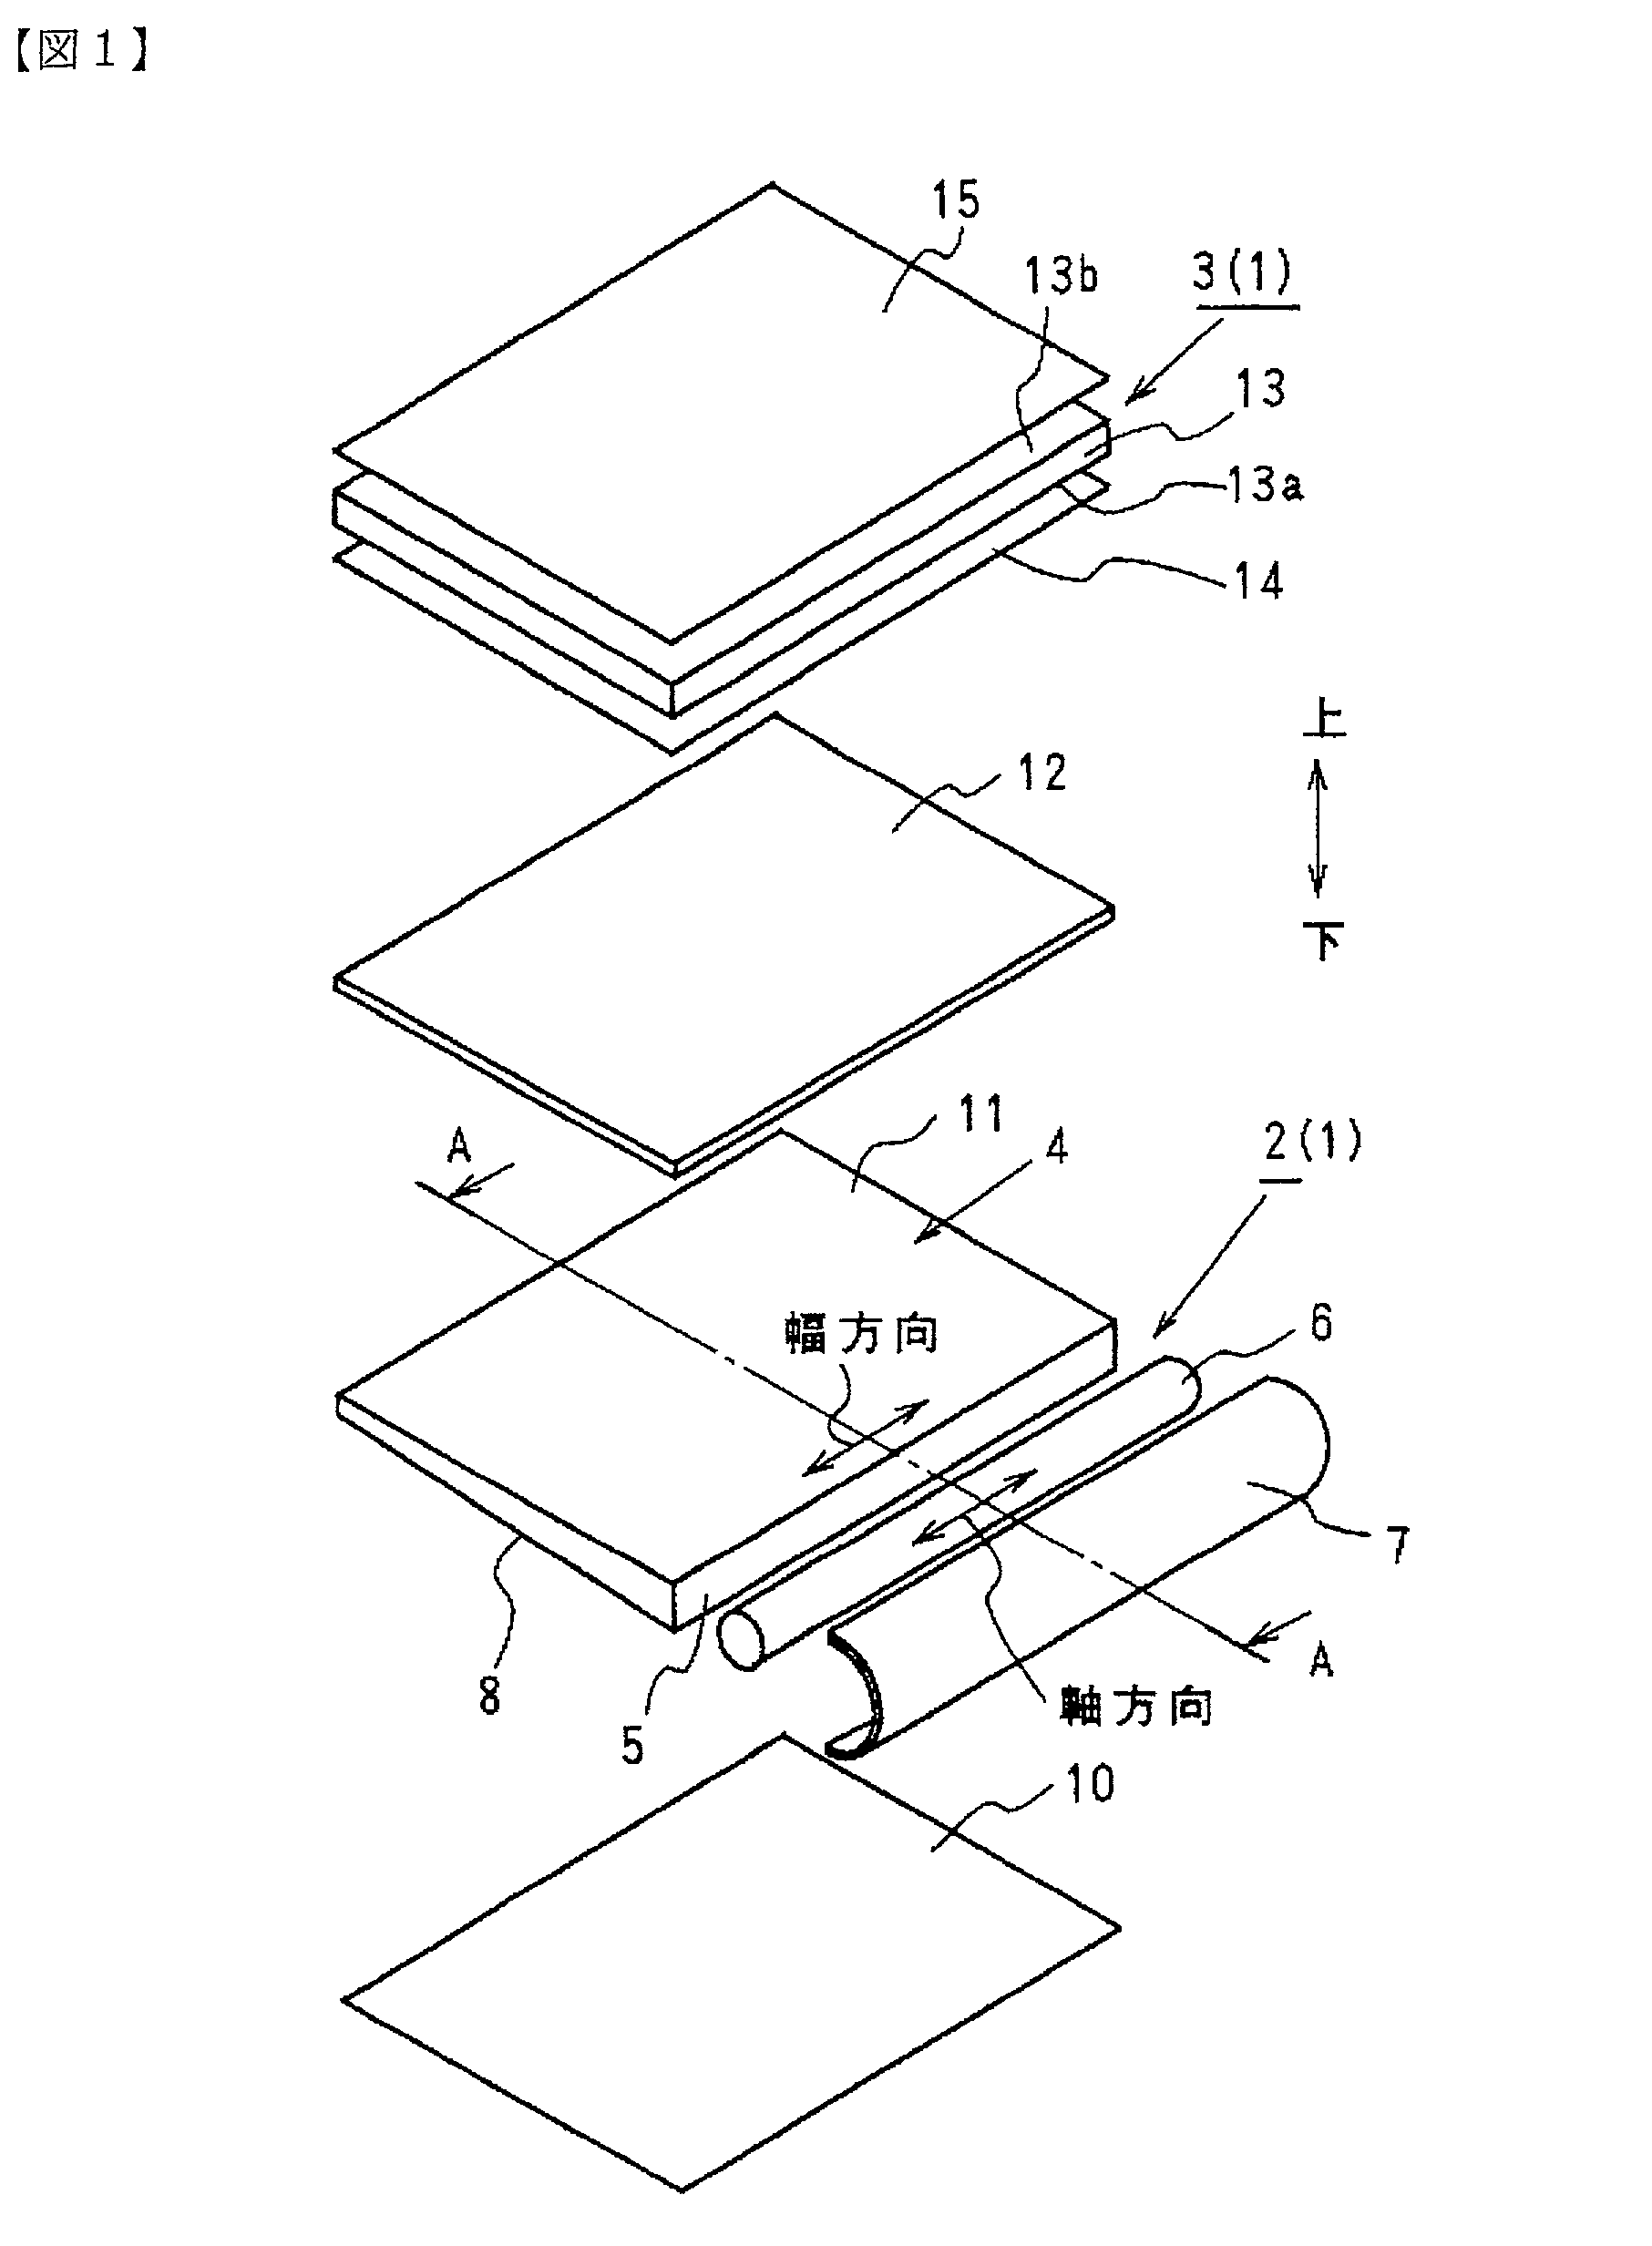 Liquid crystal display, surface light source device and light control sheet